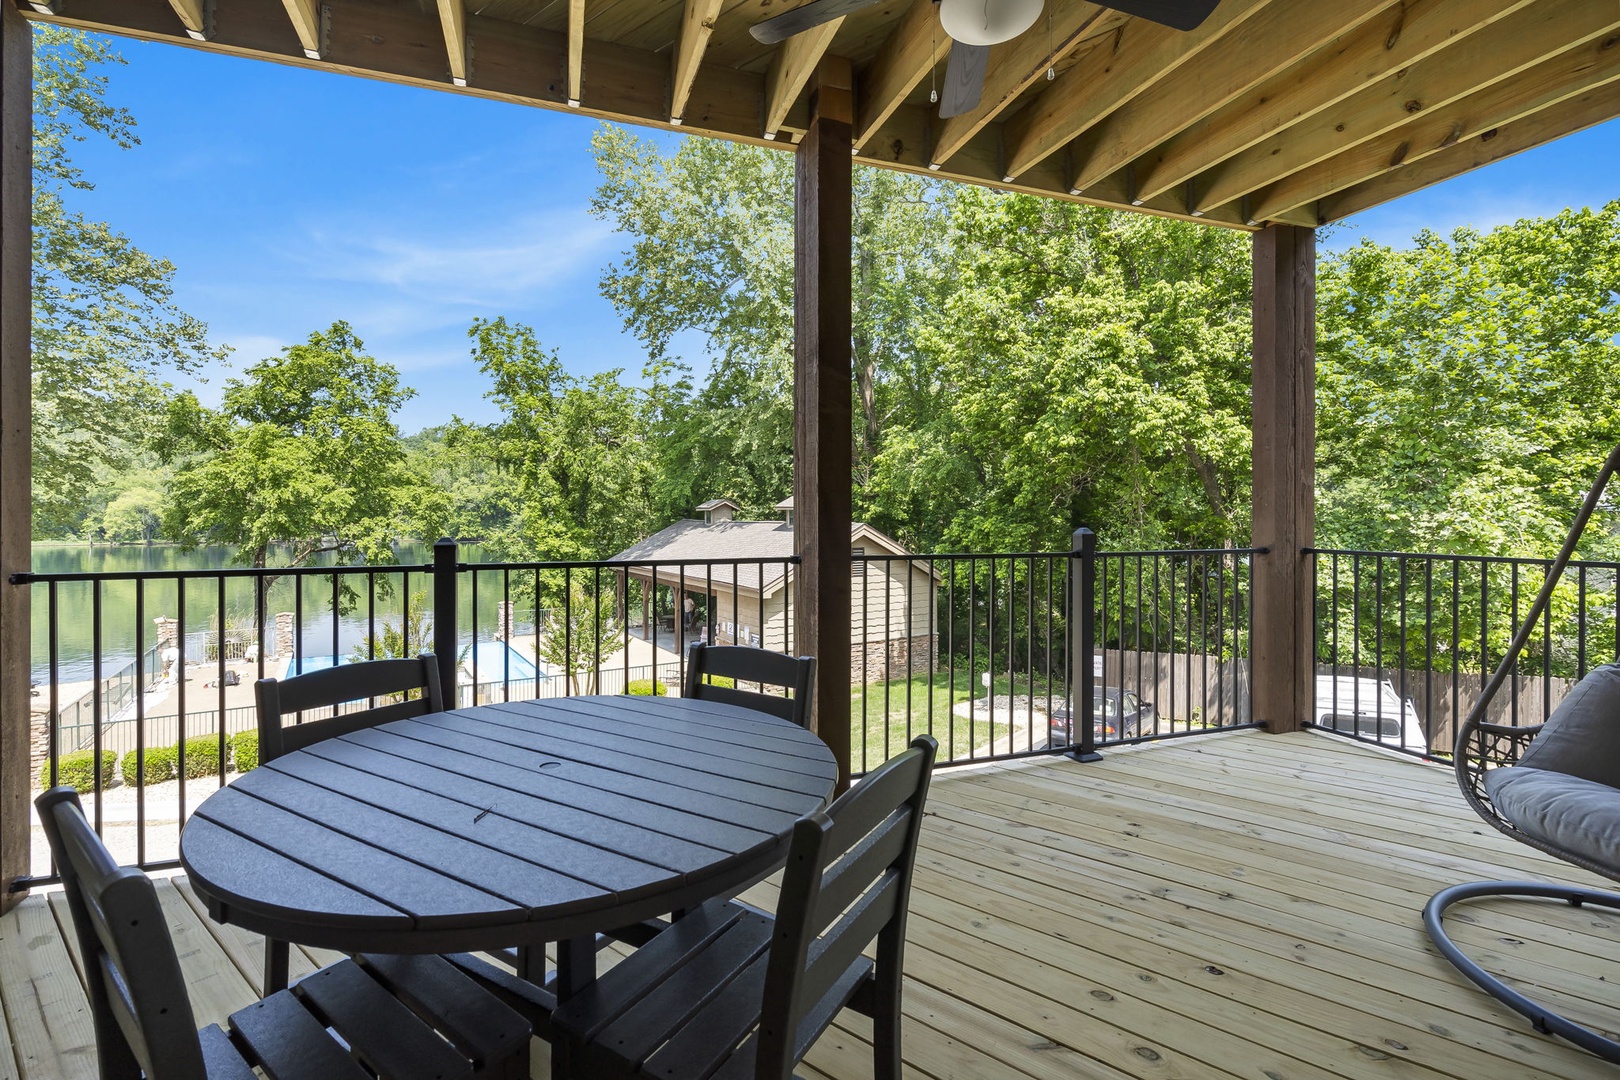 Enjoy meals and morning coffee at the patio table, offering seating for 4